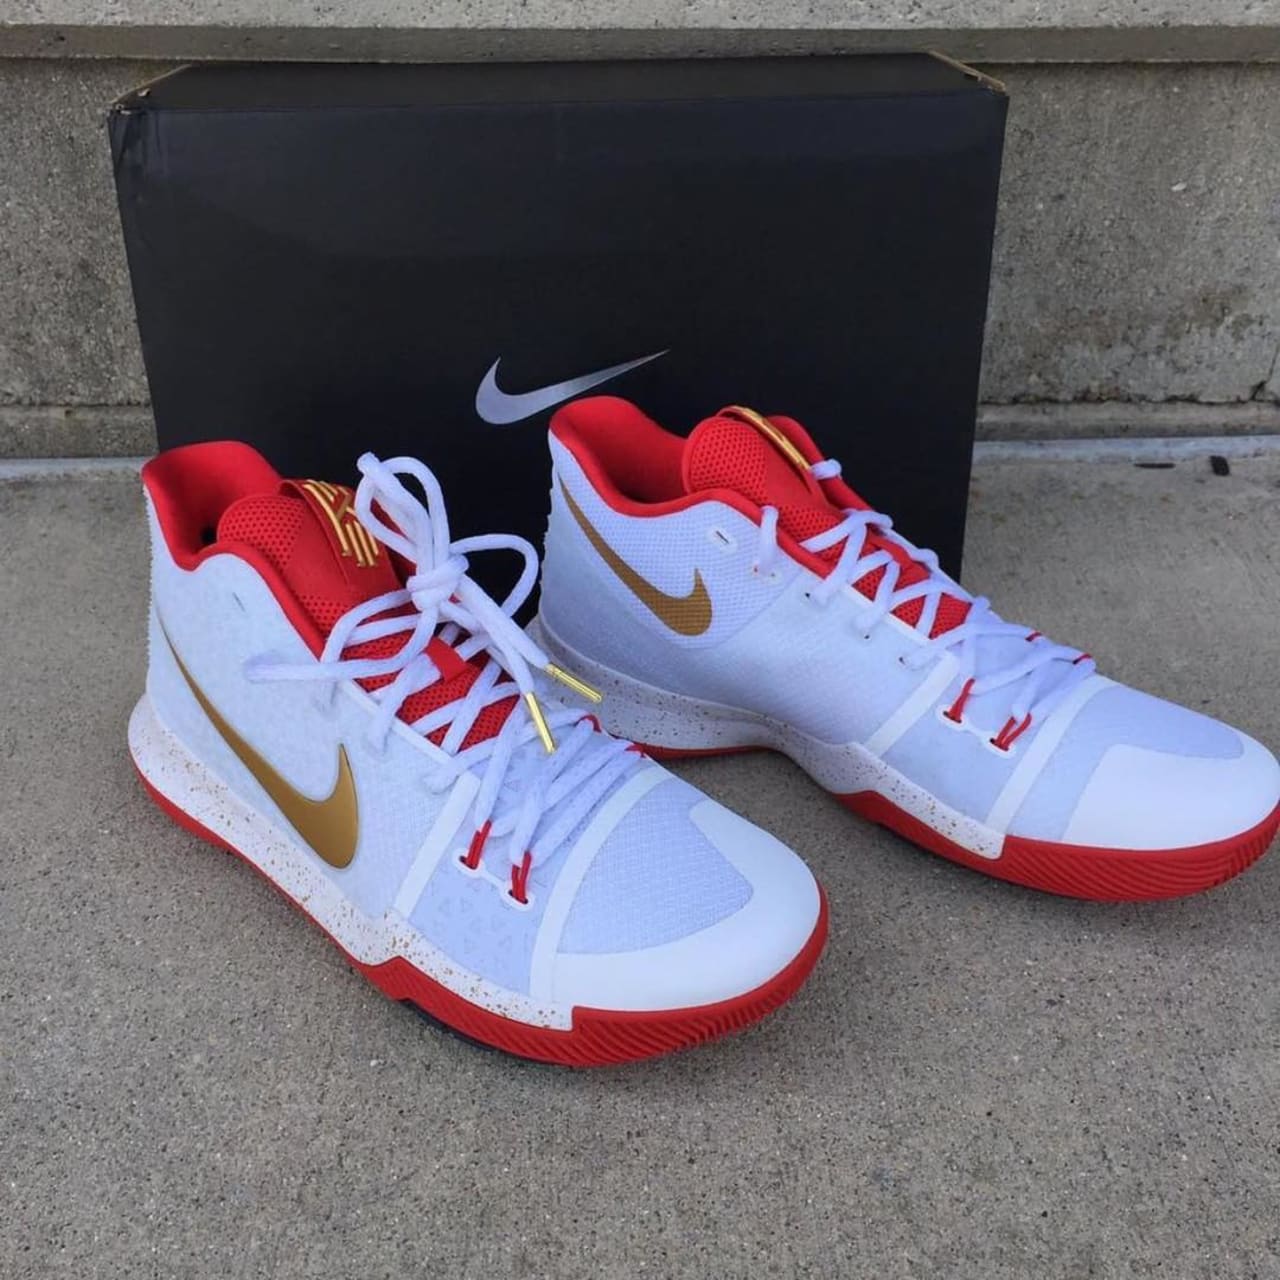 kyrie 3 white red